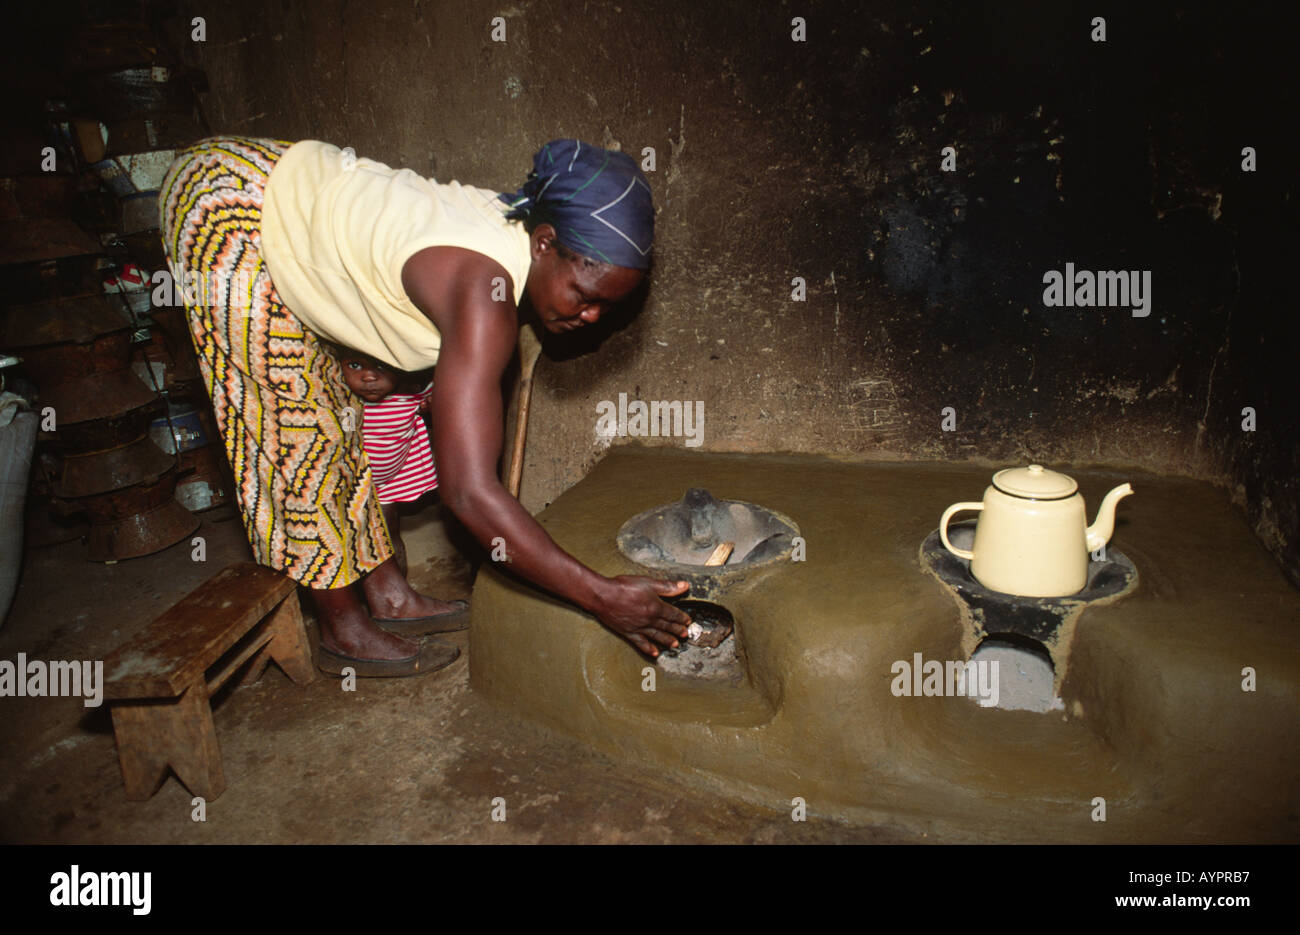 Woman lighting her new improved, fuel-efficient stove, made from clay by the local women's cooperative. Kisumu, Kenya Stock Photo